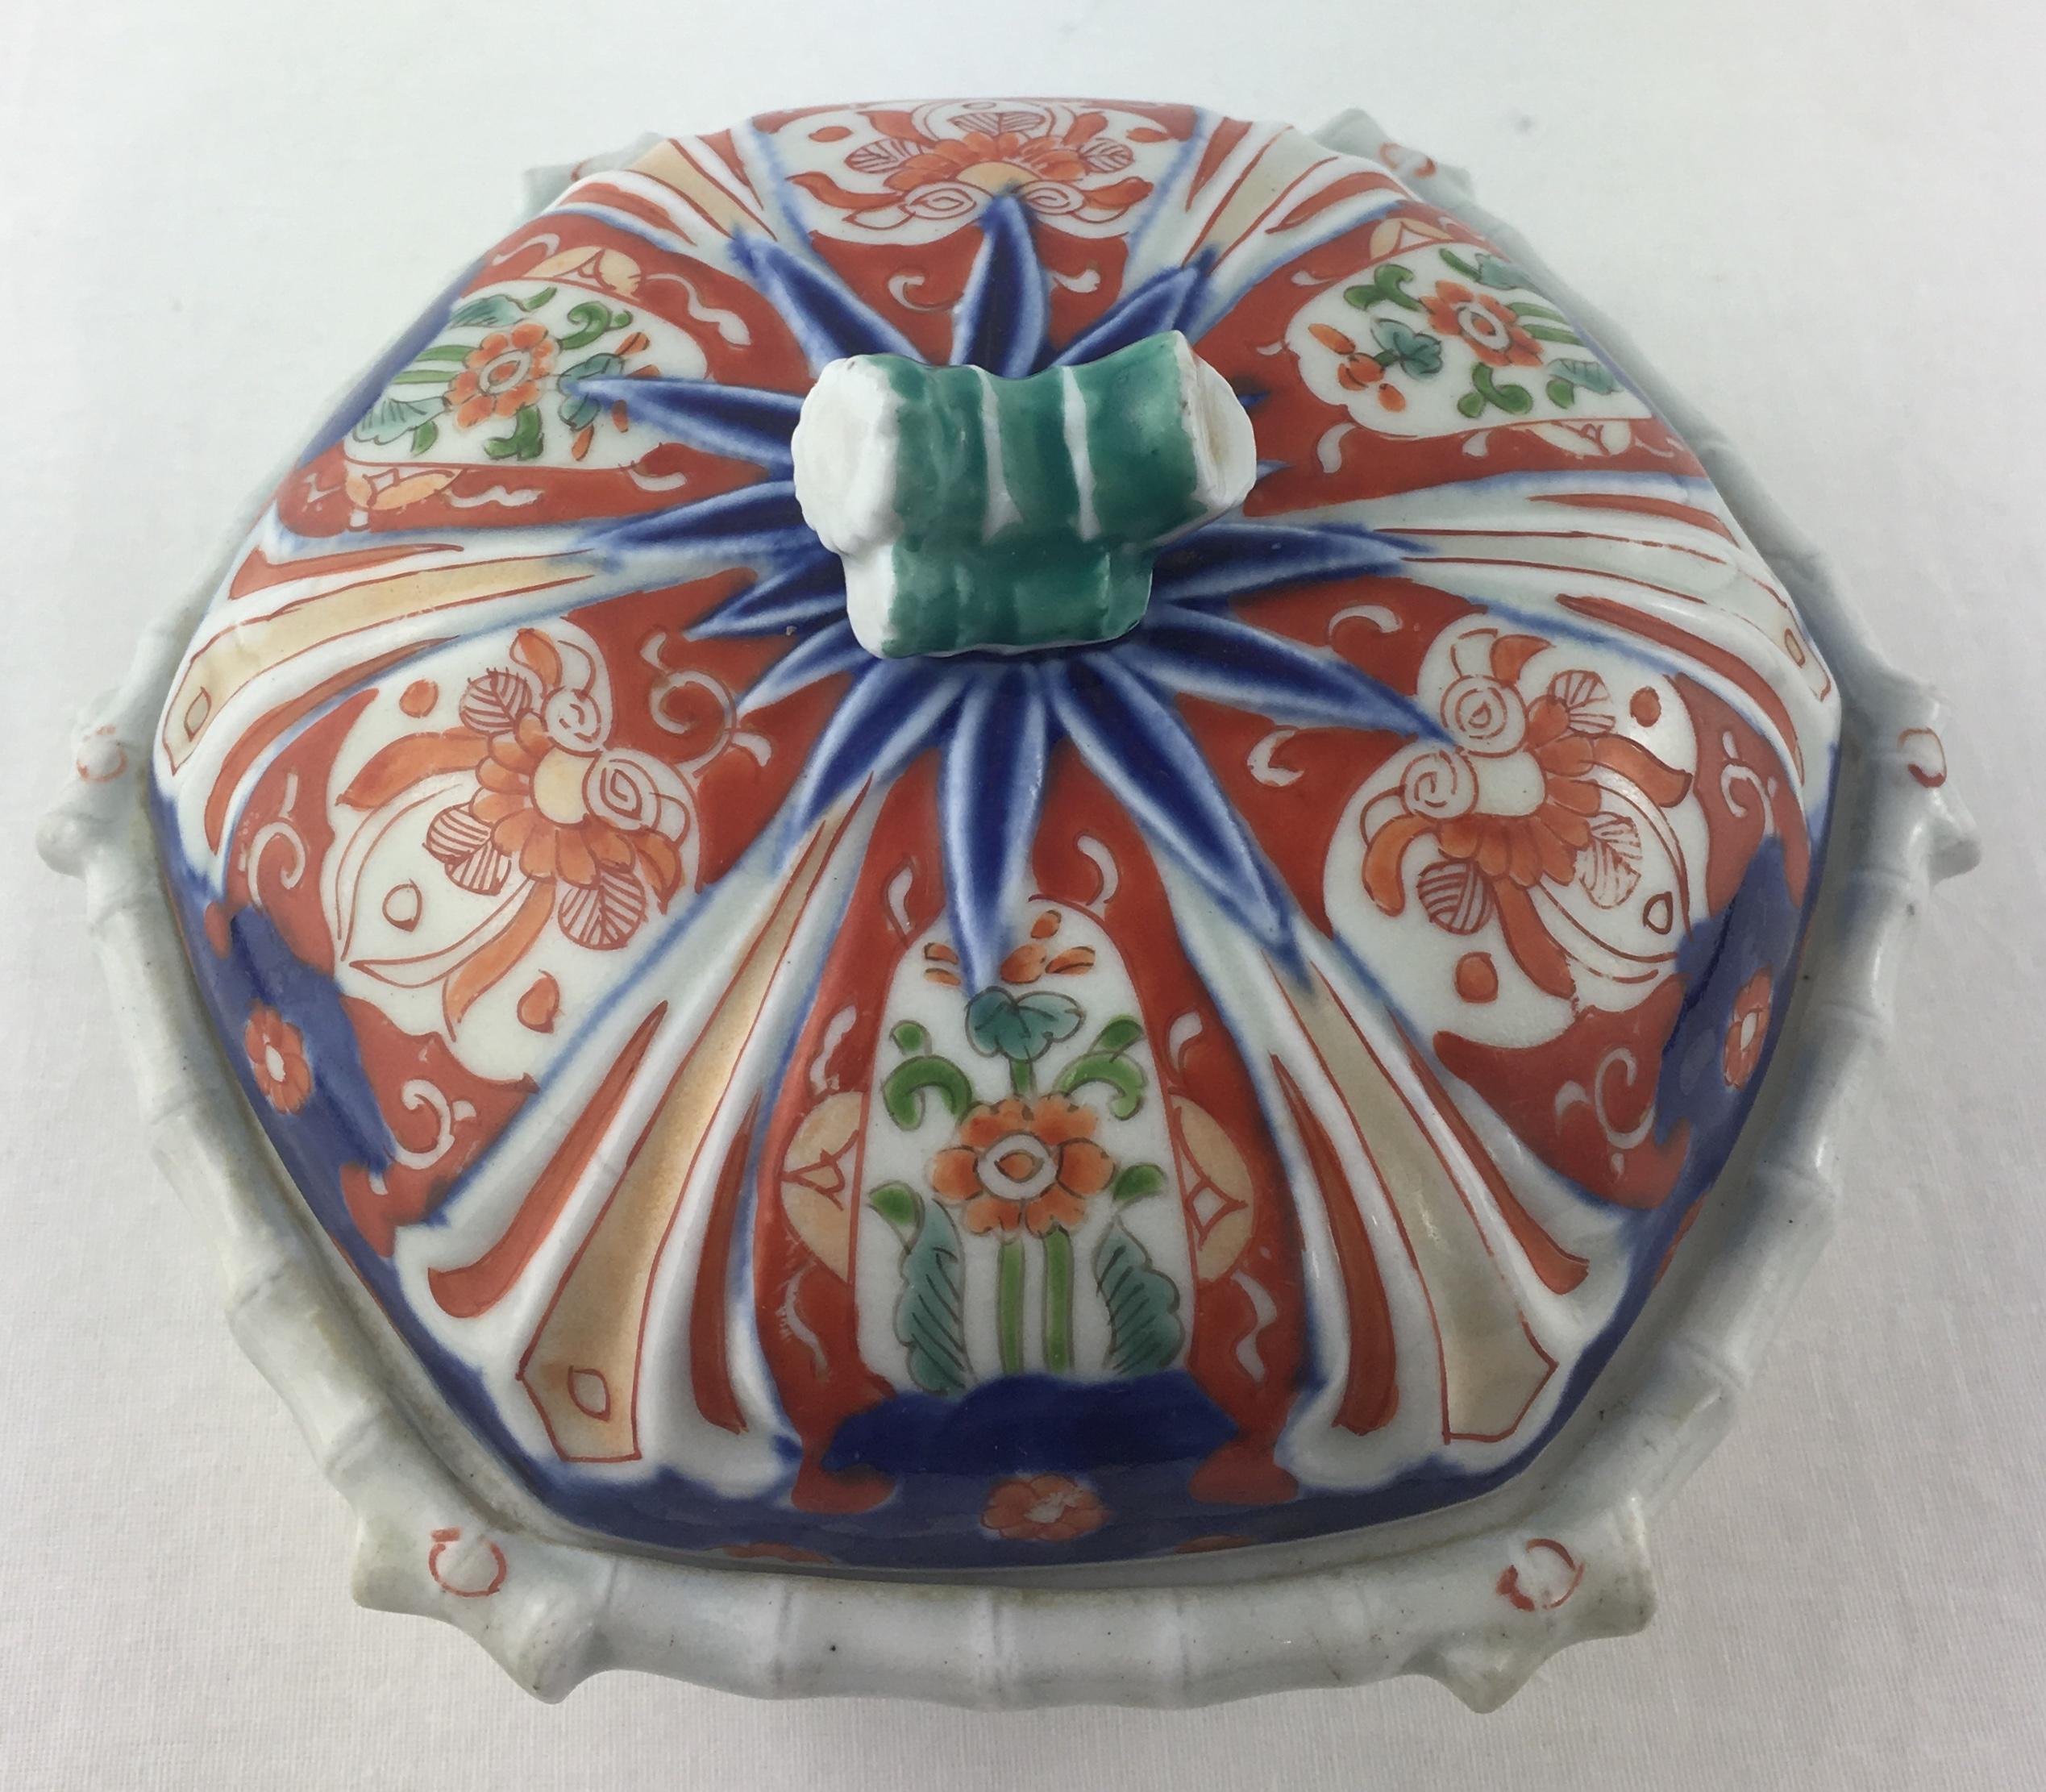 Beautiful antique hand painted porcelain decorative trinket, pill or jewelry boxes of Satsuma ware from the Dai Nippon/ Great Japan period. 

The crest on top is traditional in most old and authentic pieces of Satsumaware. This pottery was made